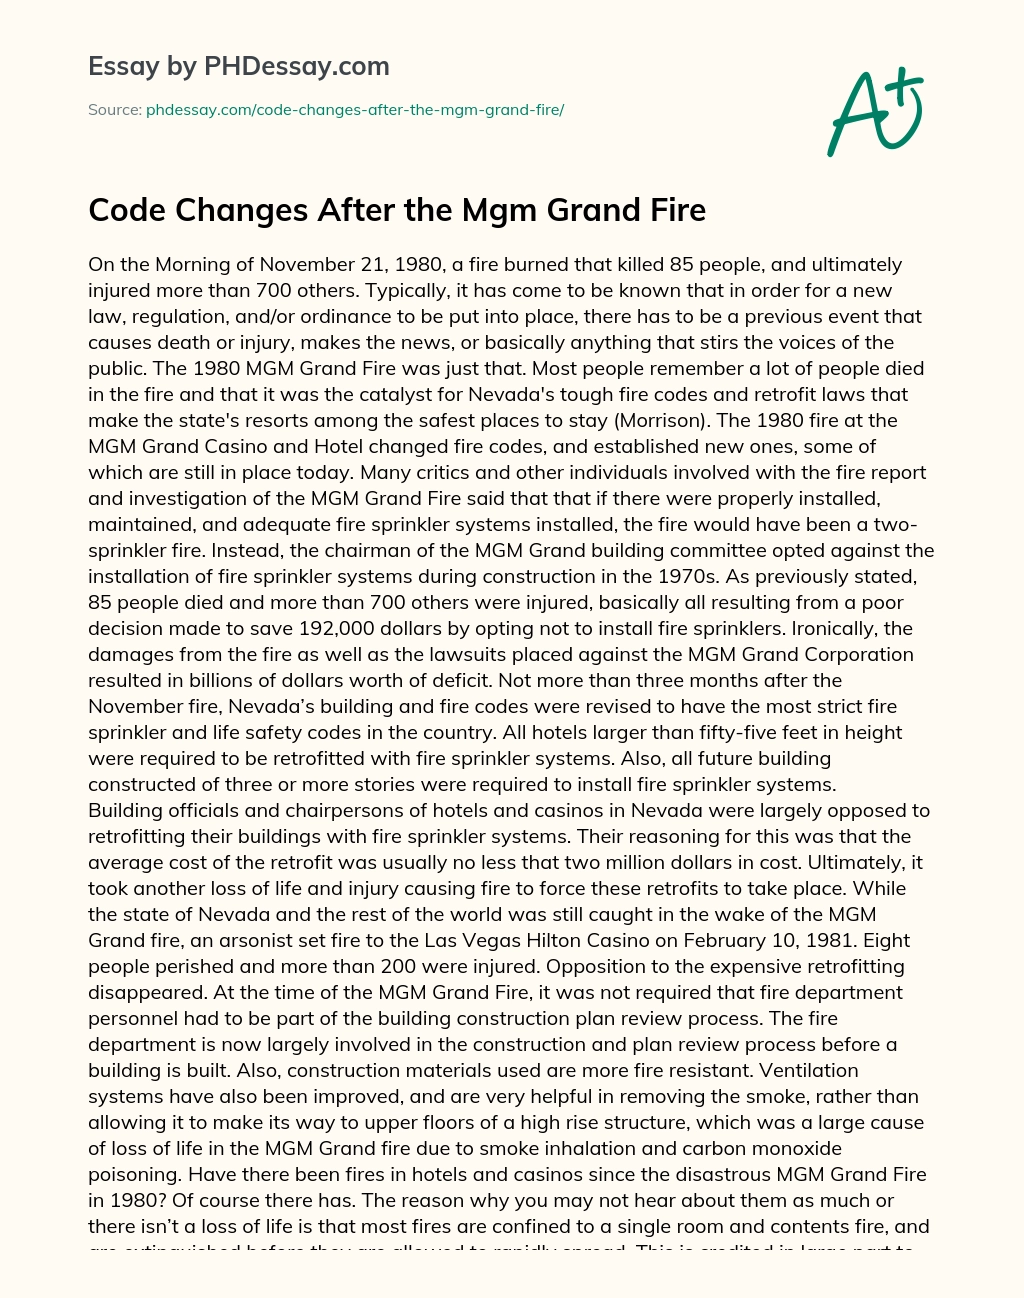 Code Changes After the Mgm Grand Fire essay